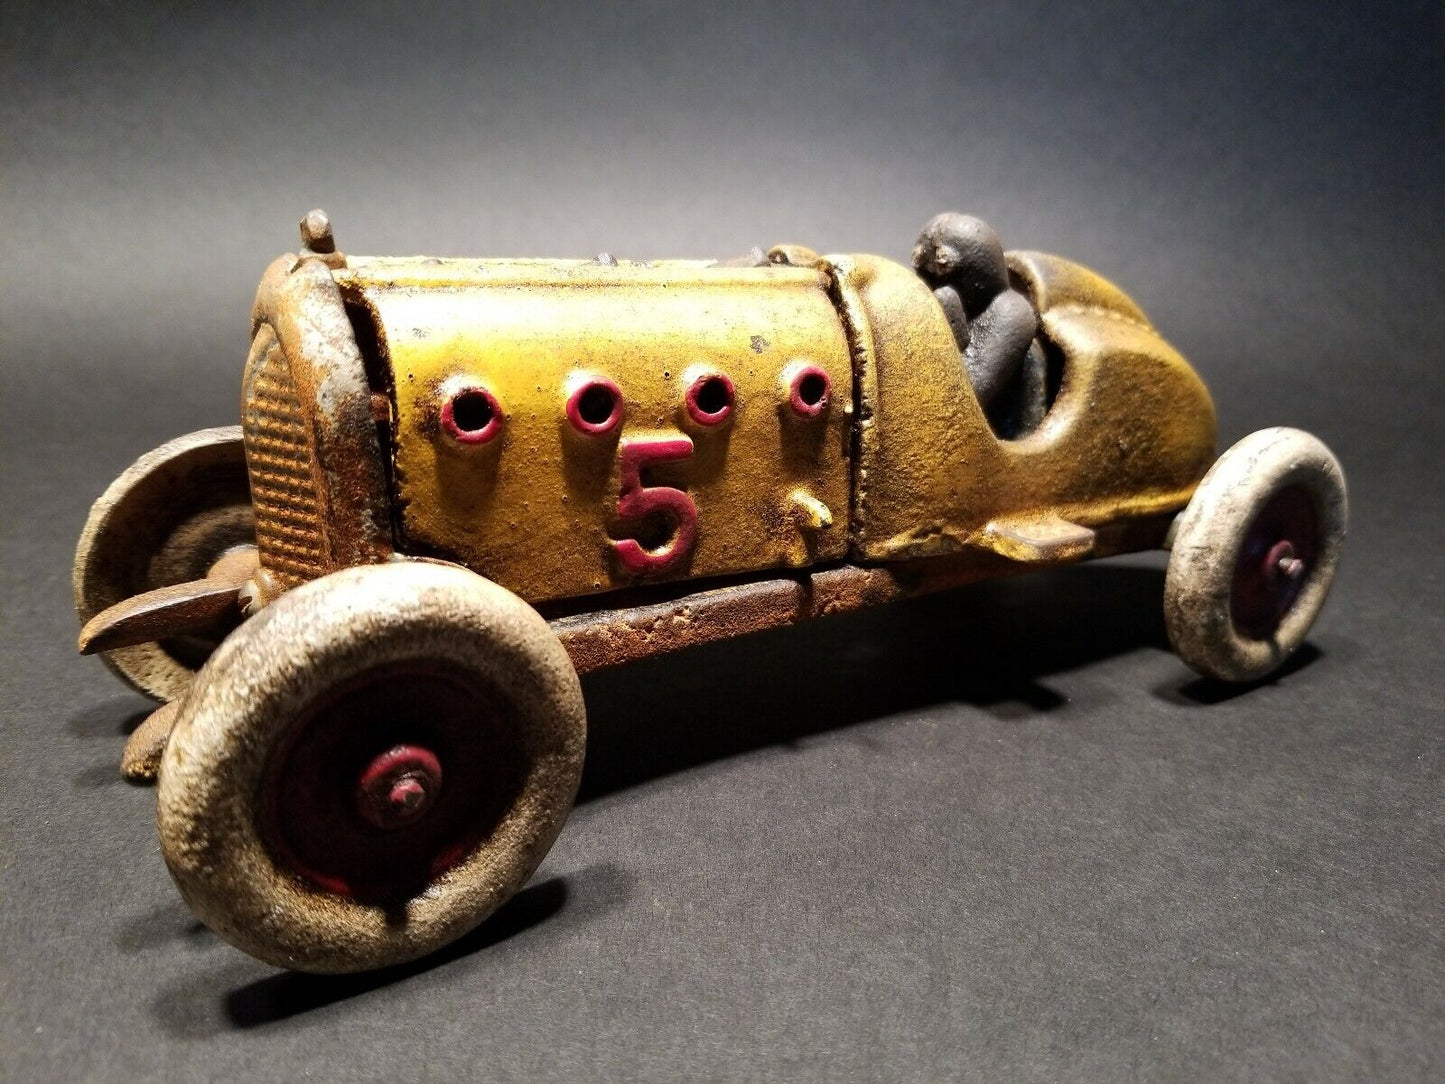 Antique Vintage Style Yellow Cast Iron #5 Toy Race Car w Lifting Hood